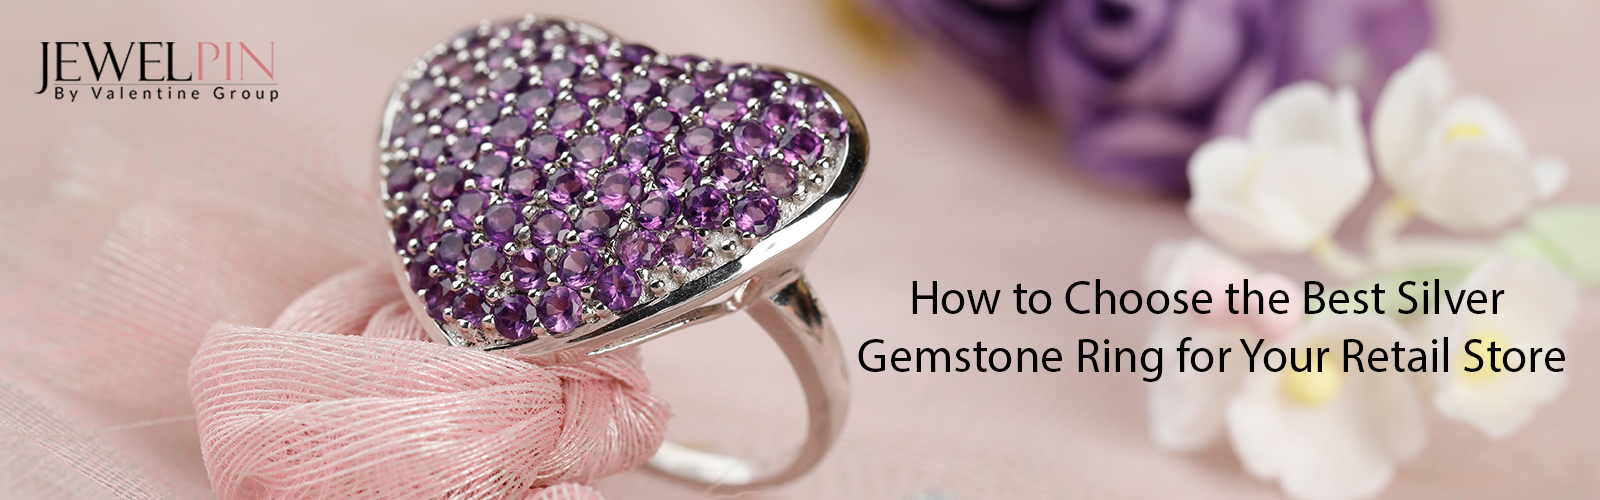 how to choose the best silver gemstone ring for your retail store